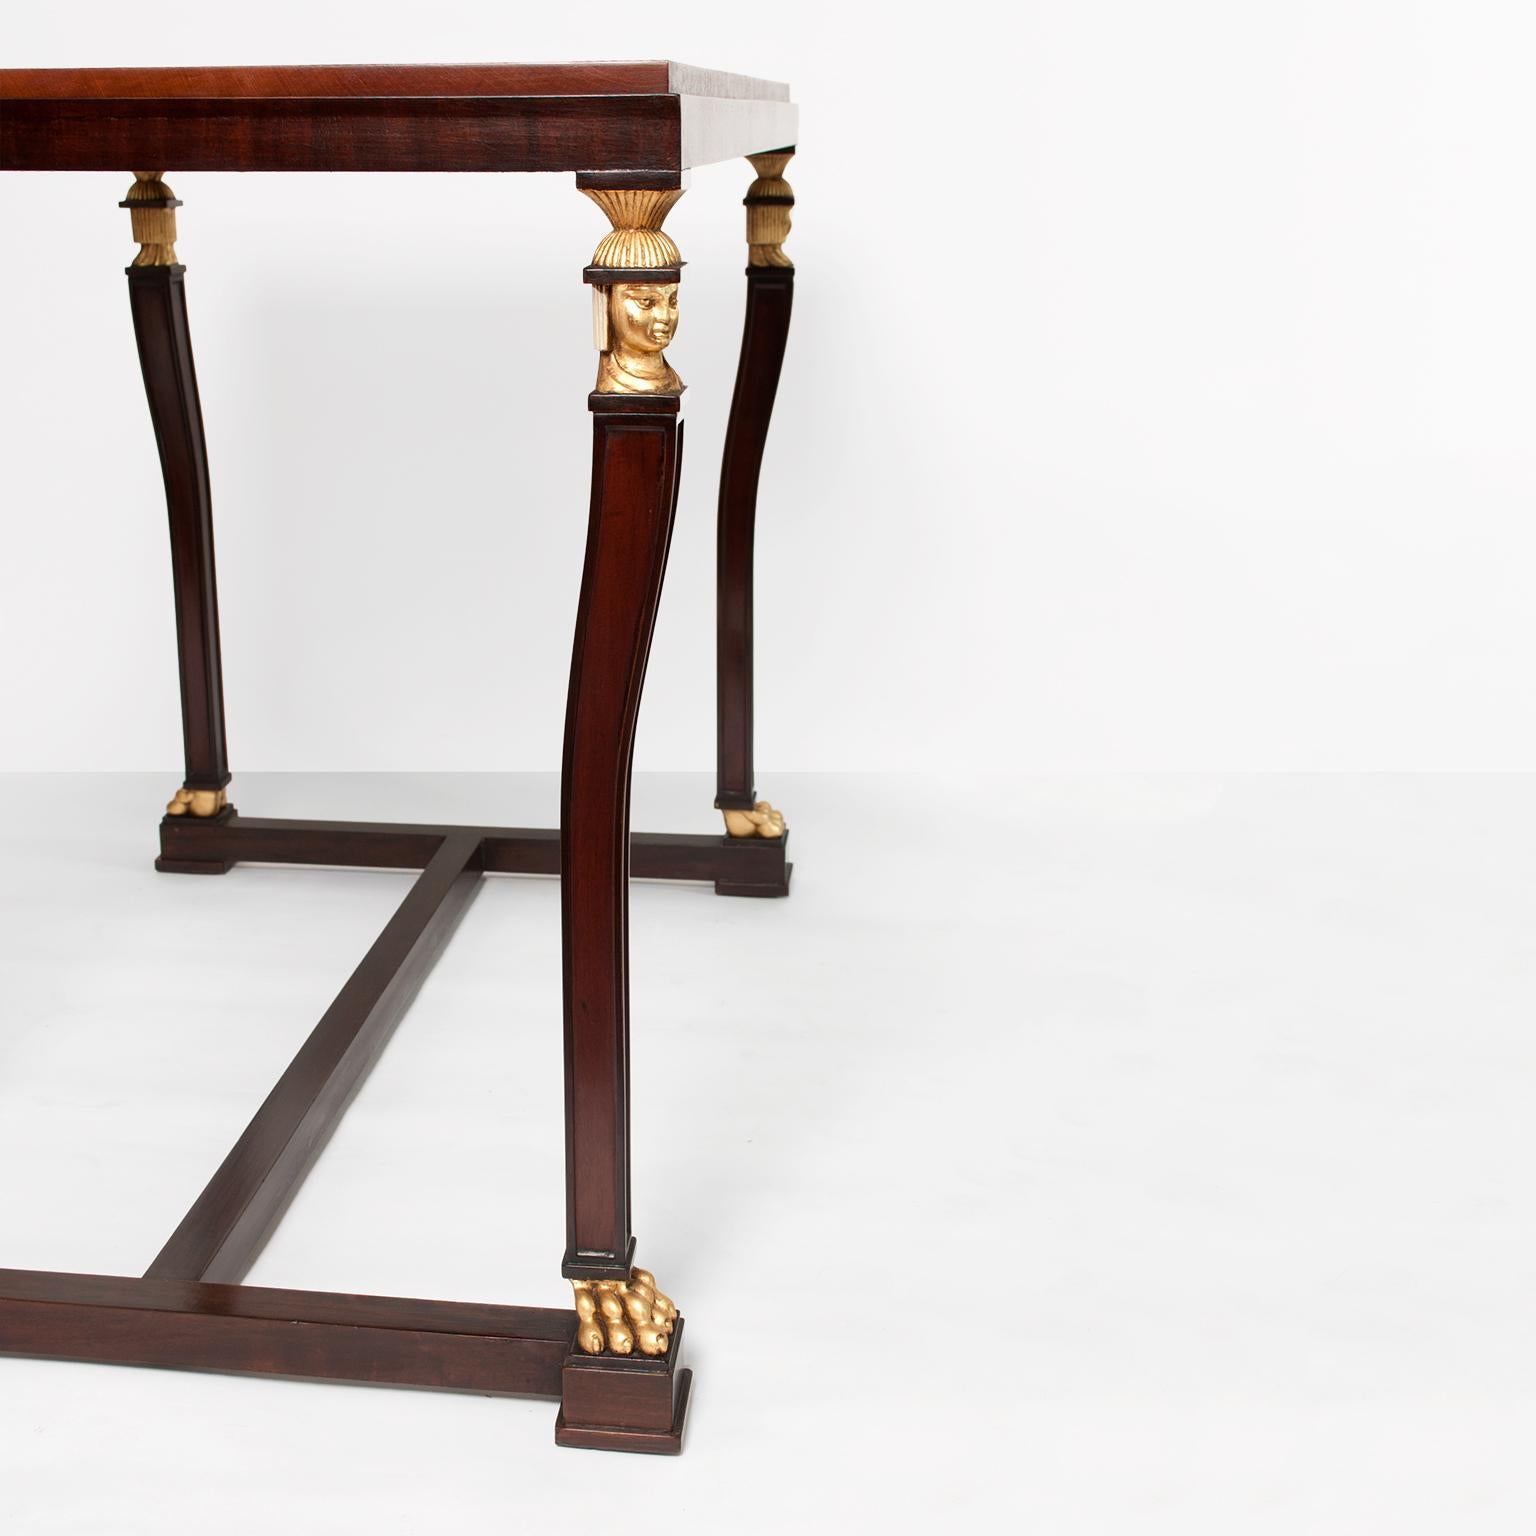 Marquetry Axel Einar Hjorth Swedish Grace Mahogany Console Center Table for NK, Stockholm For Sale